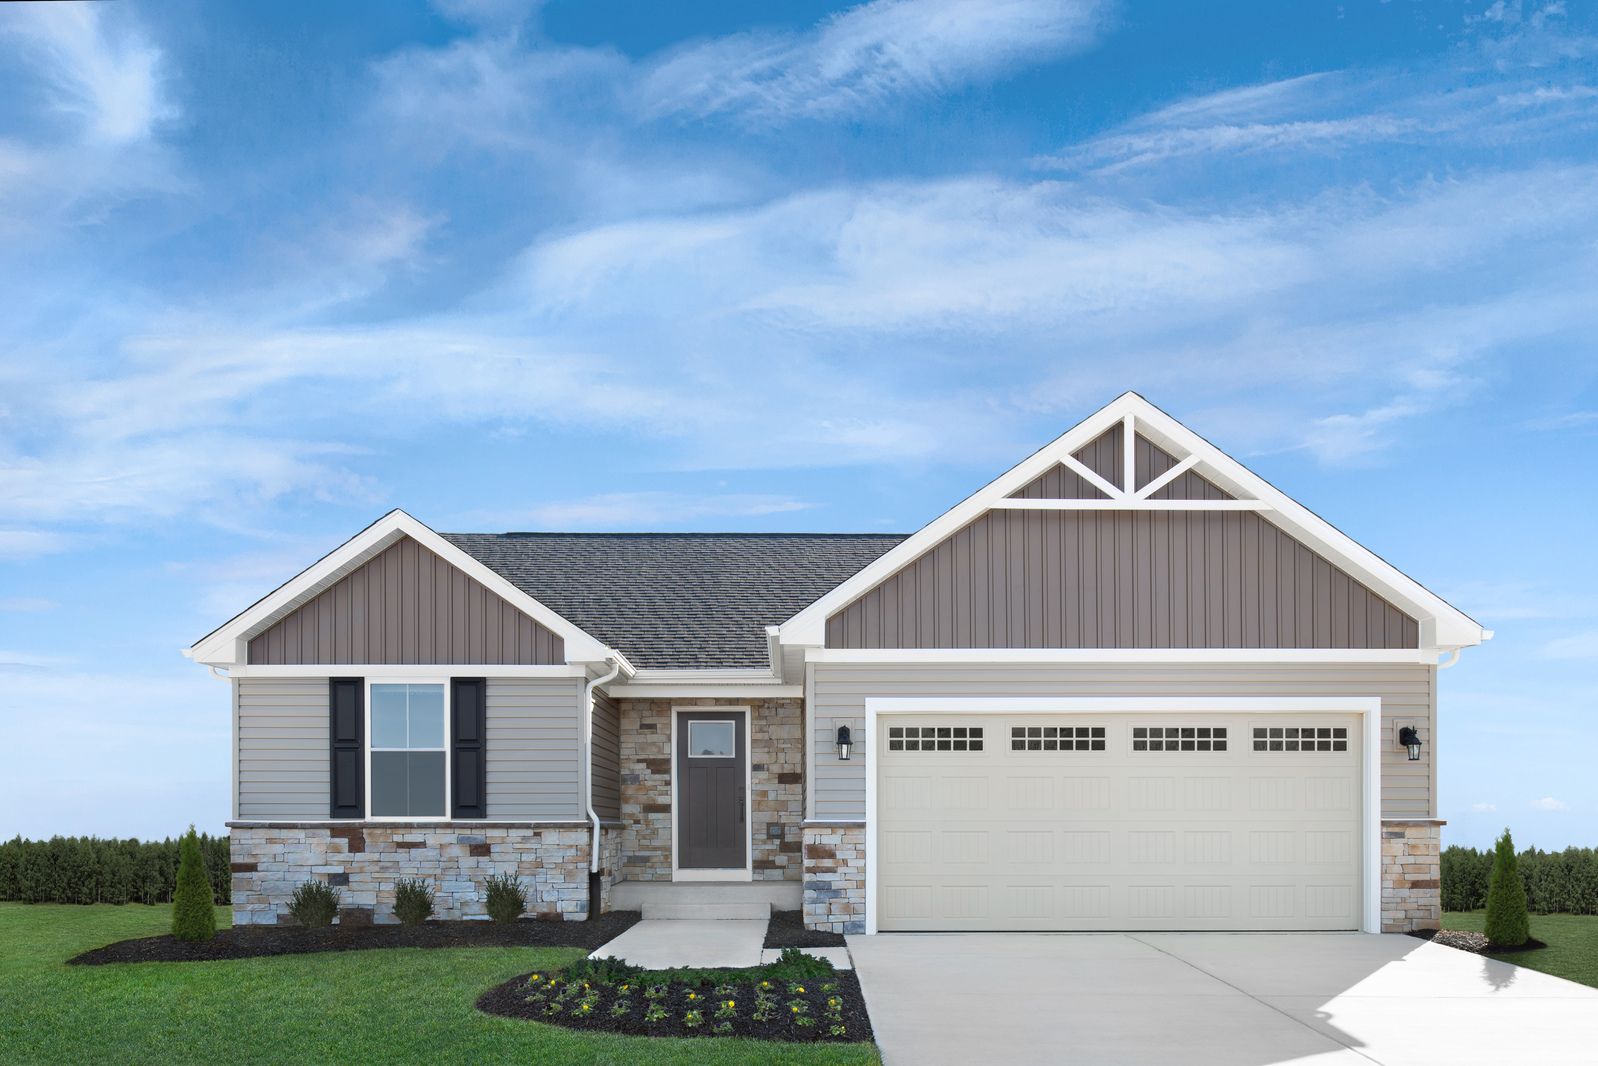 OWN A BRAND NEW HOME IN THE CITY OF LANCASTER WITH A 2 CAR GARAGE!